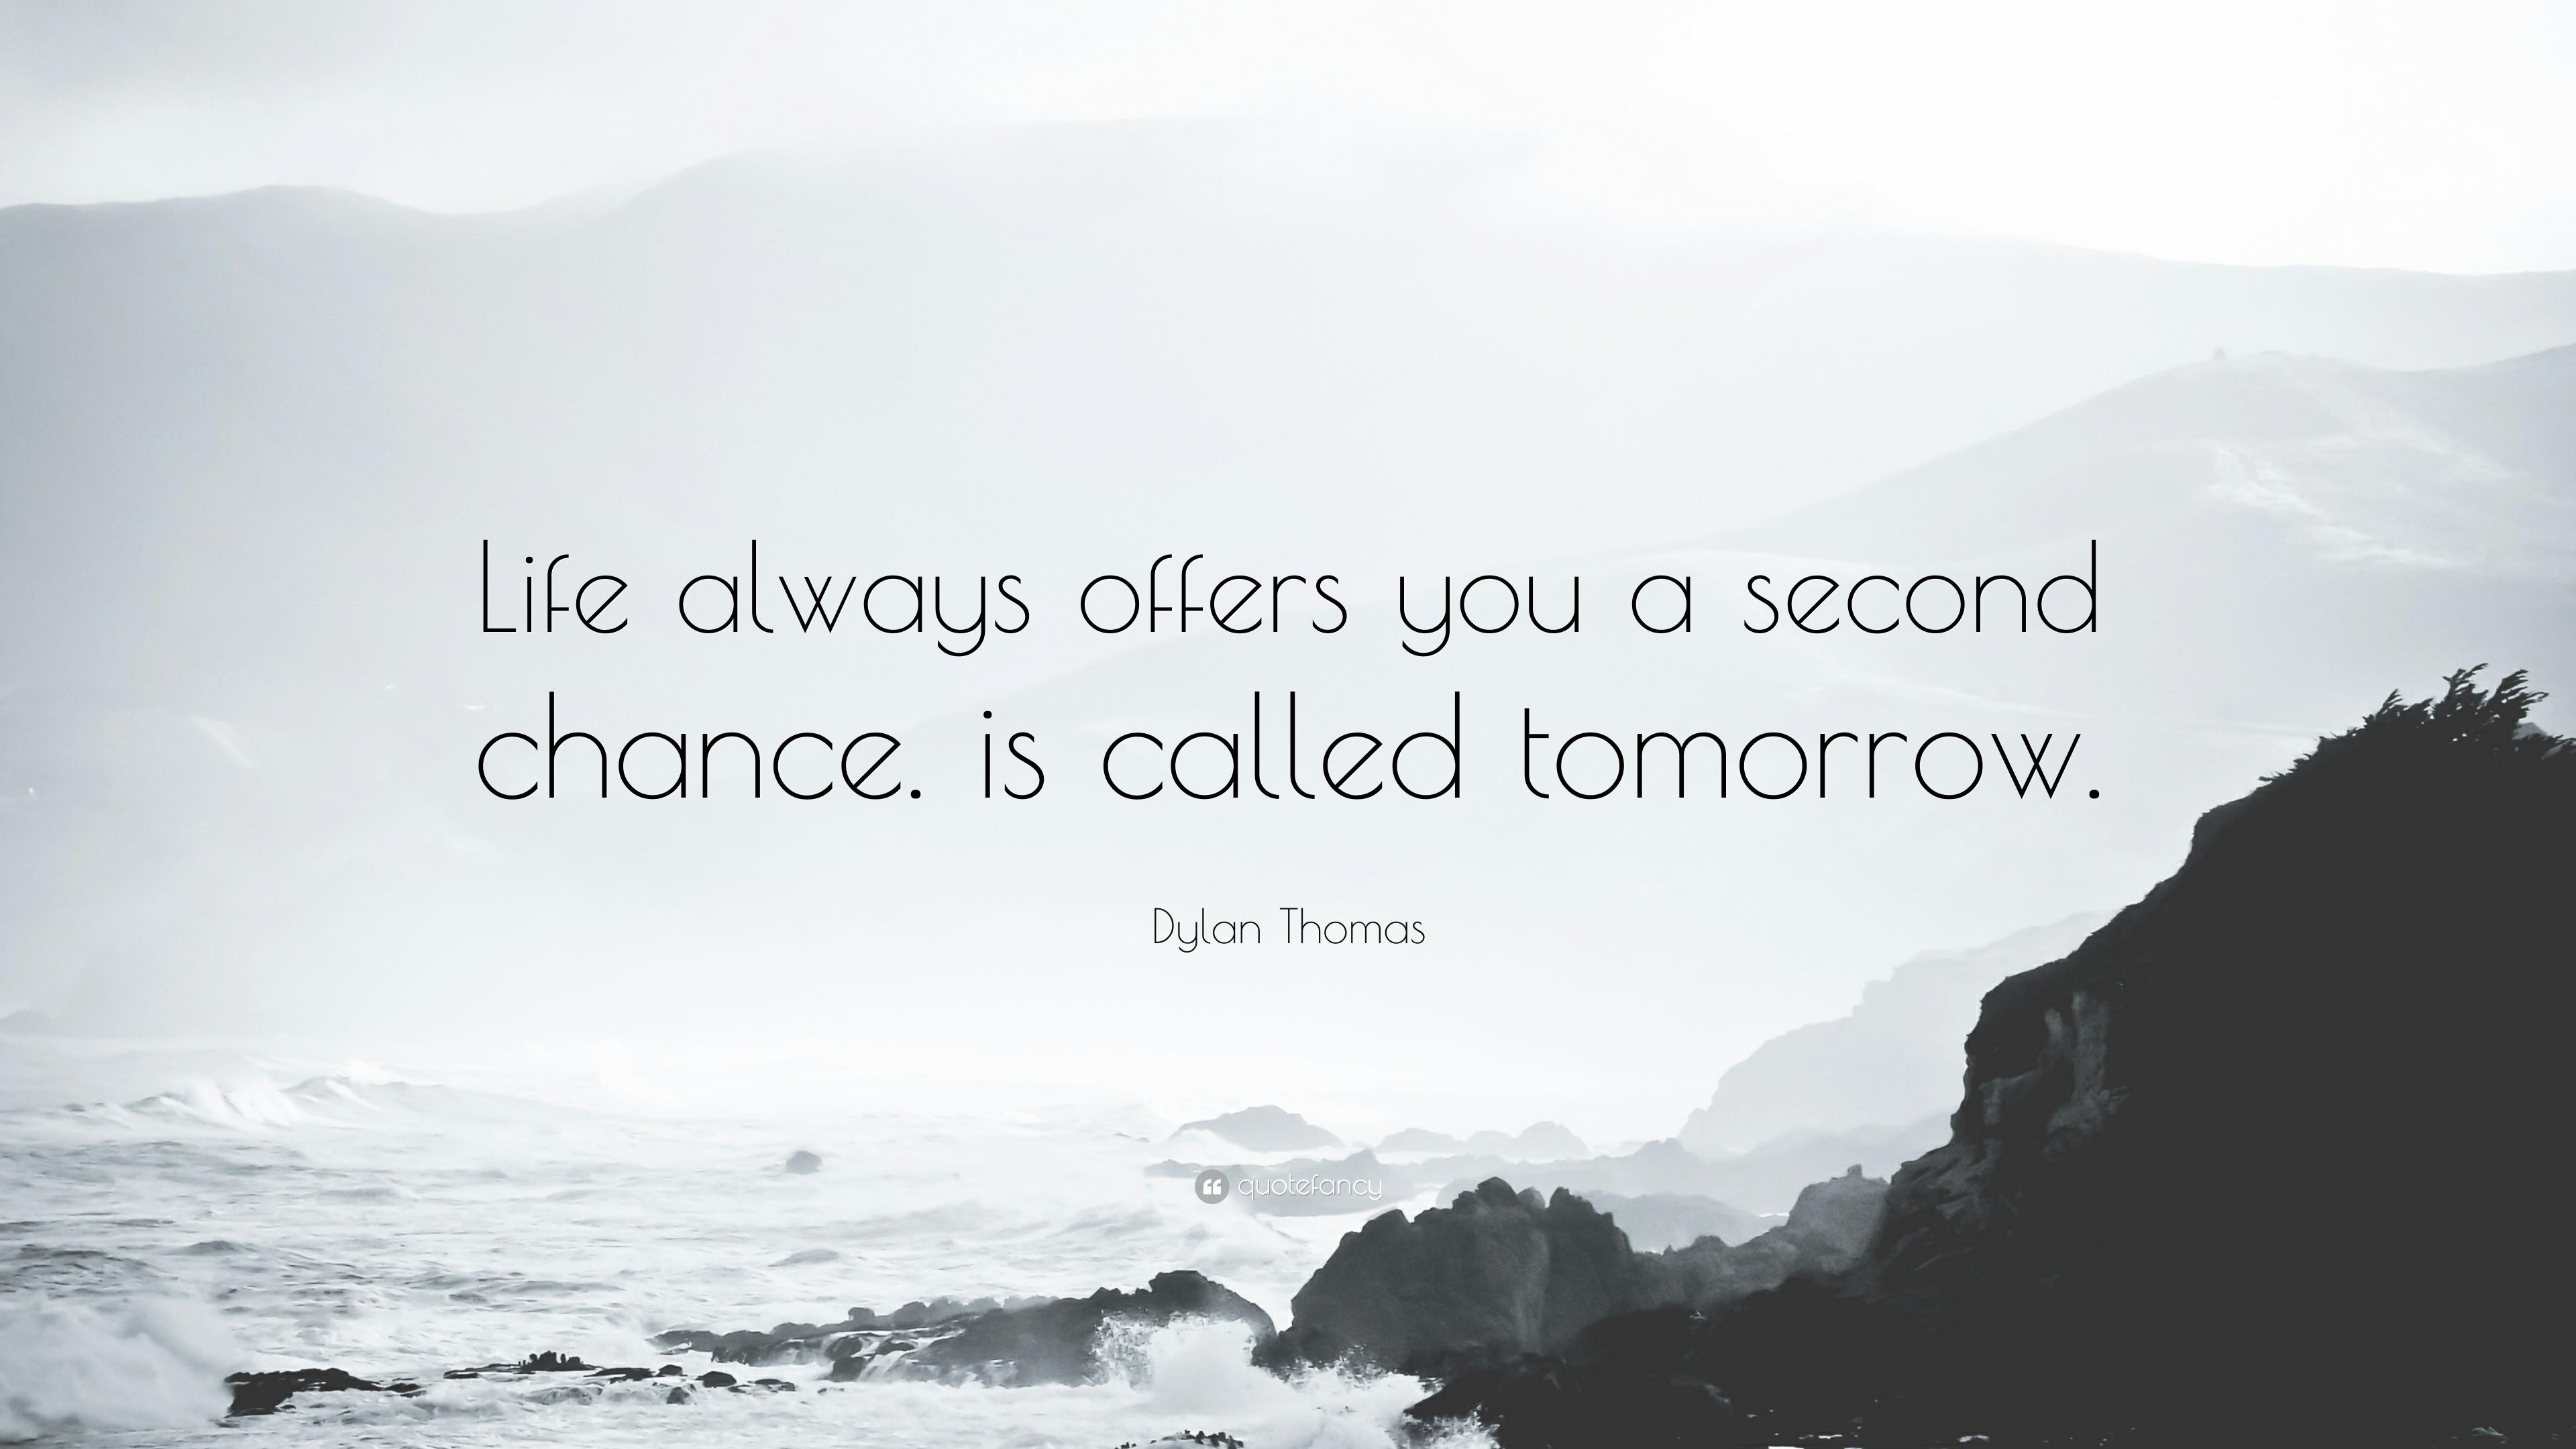 Dylan Thomas Quote: “Life always offers you a second chance